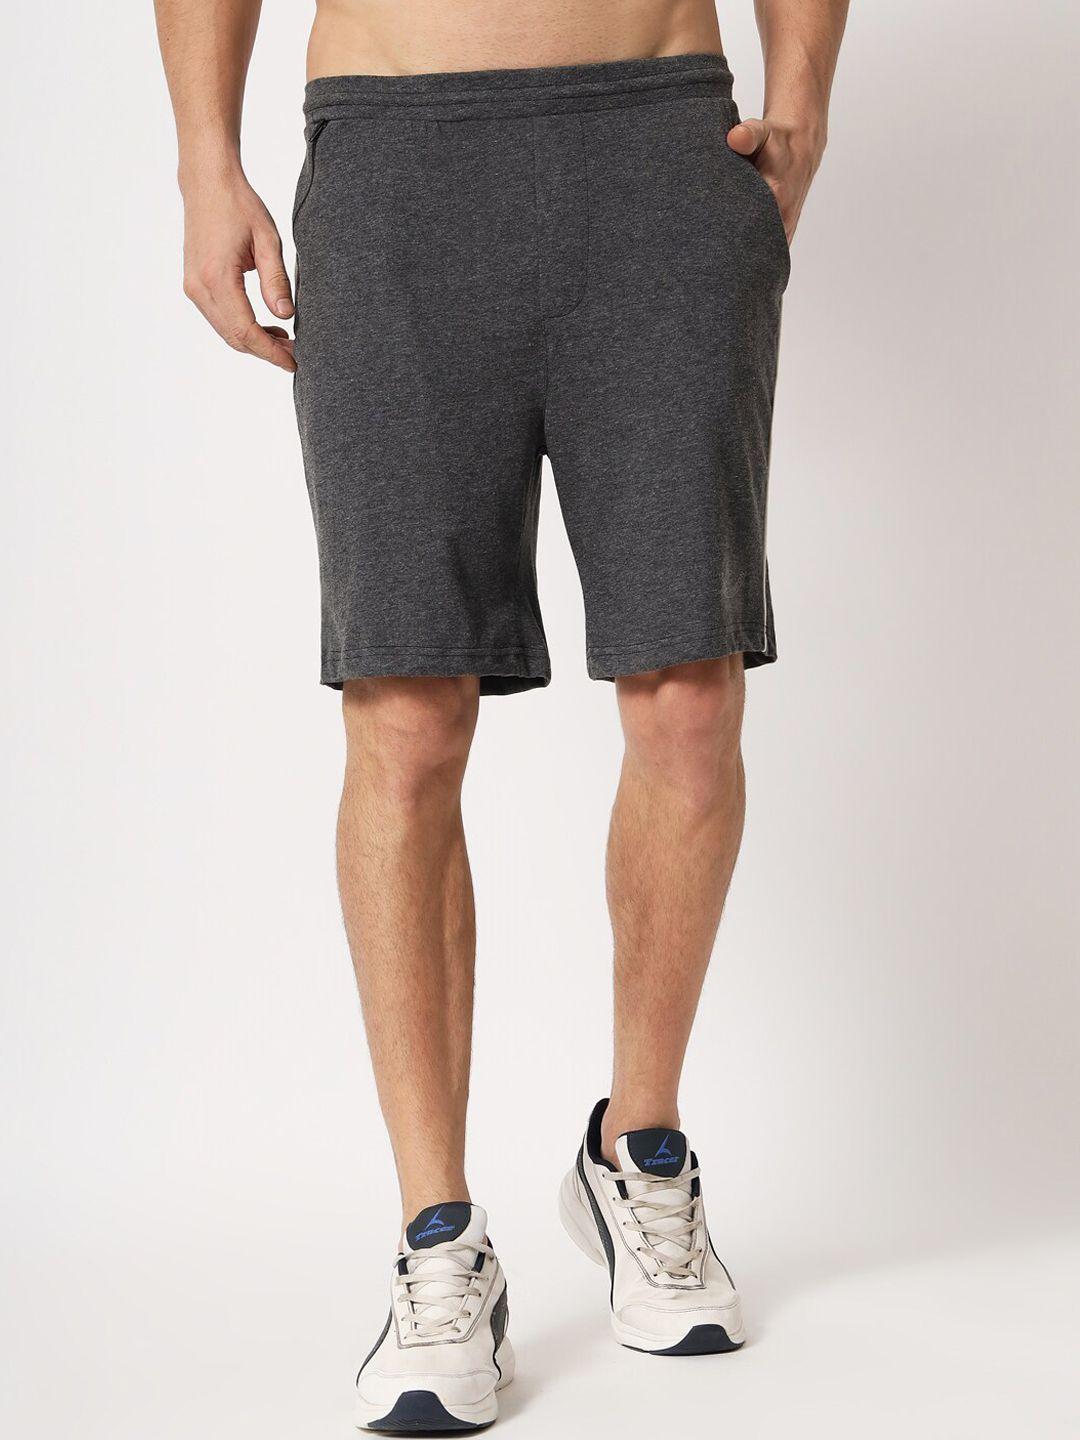 aazing london men charcoal solid cotton sports shorts